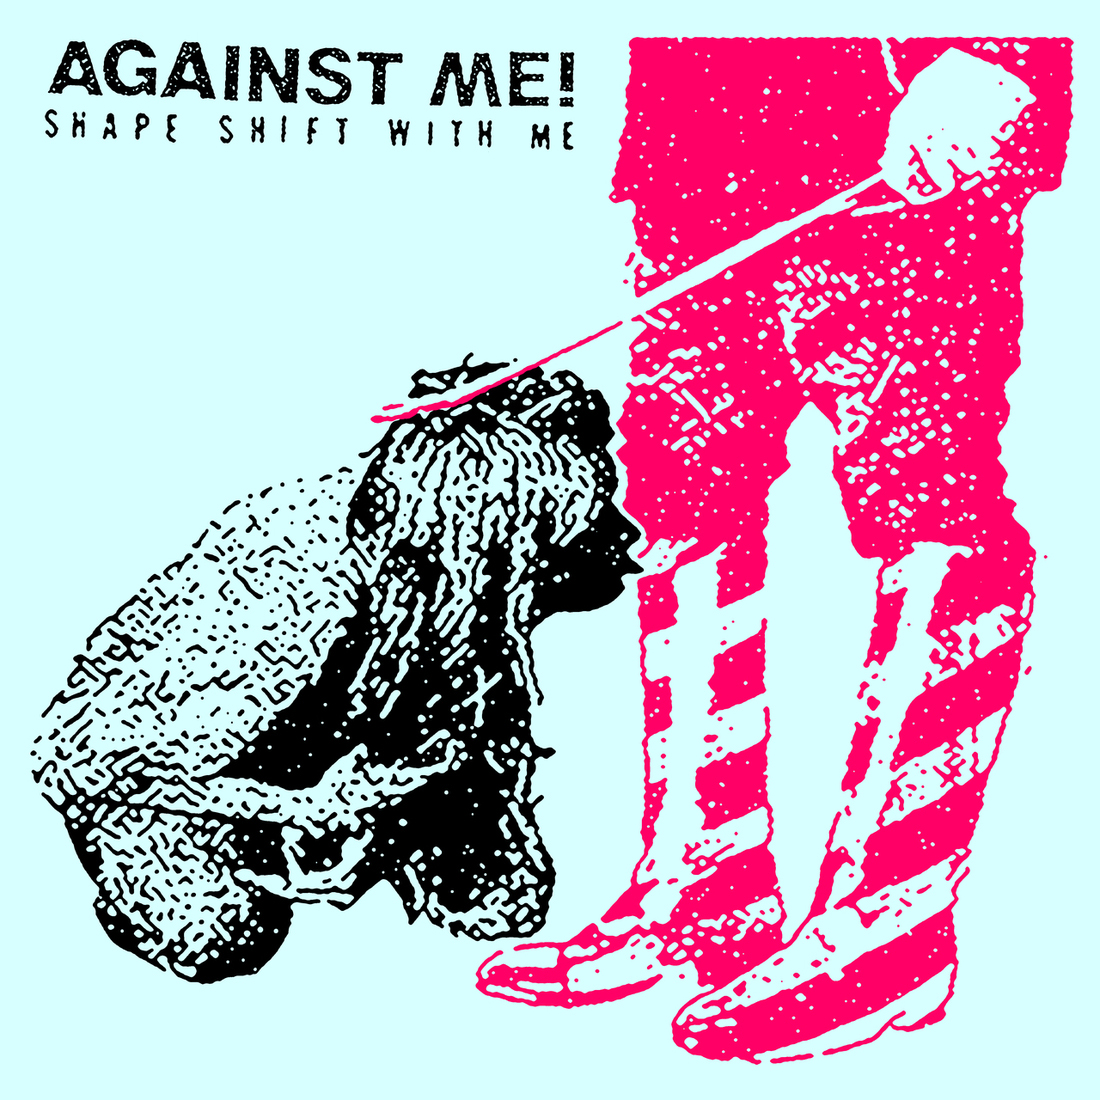 'Shape Shift with Me' by Against Me!, album review by Gregory Adams.